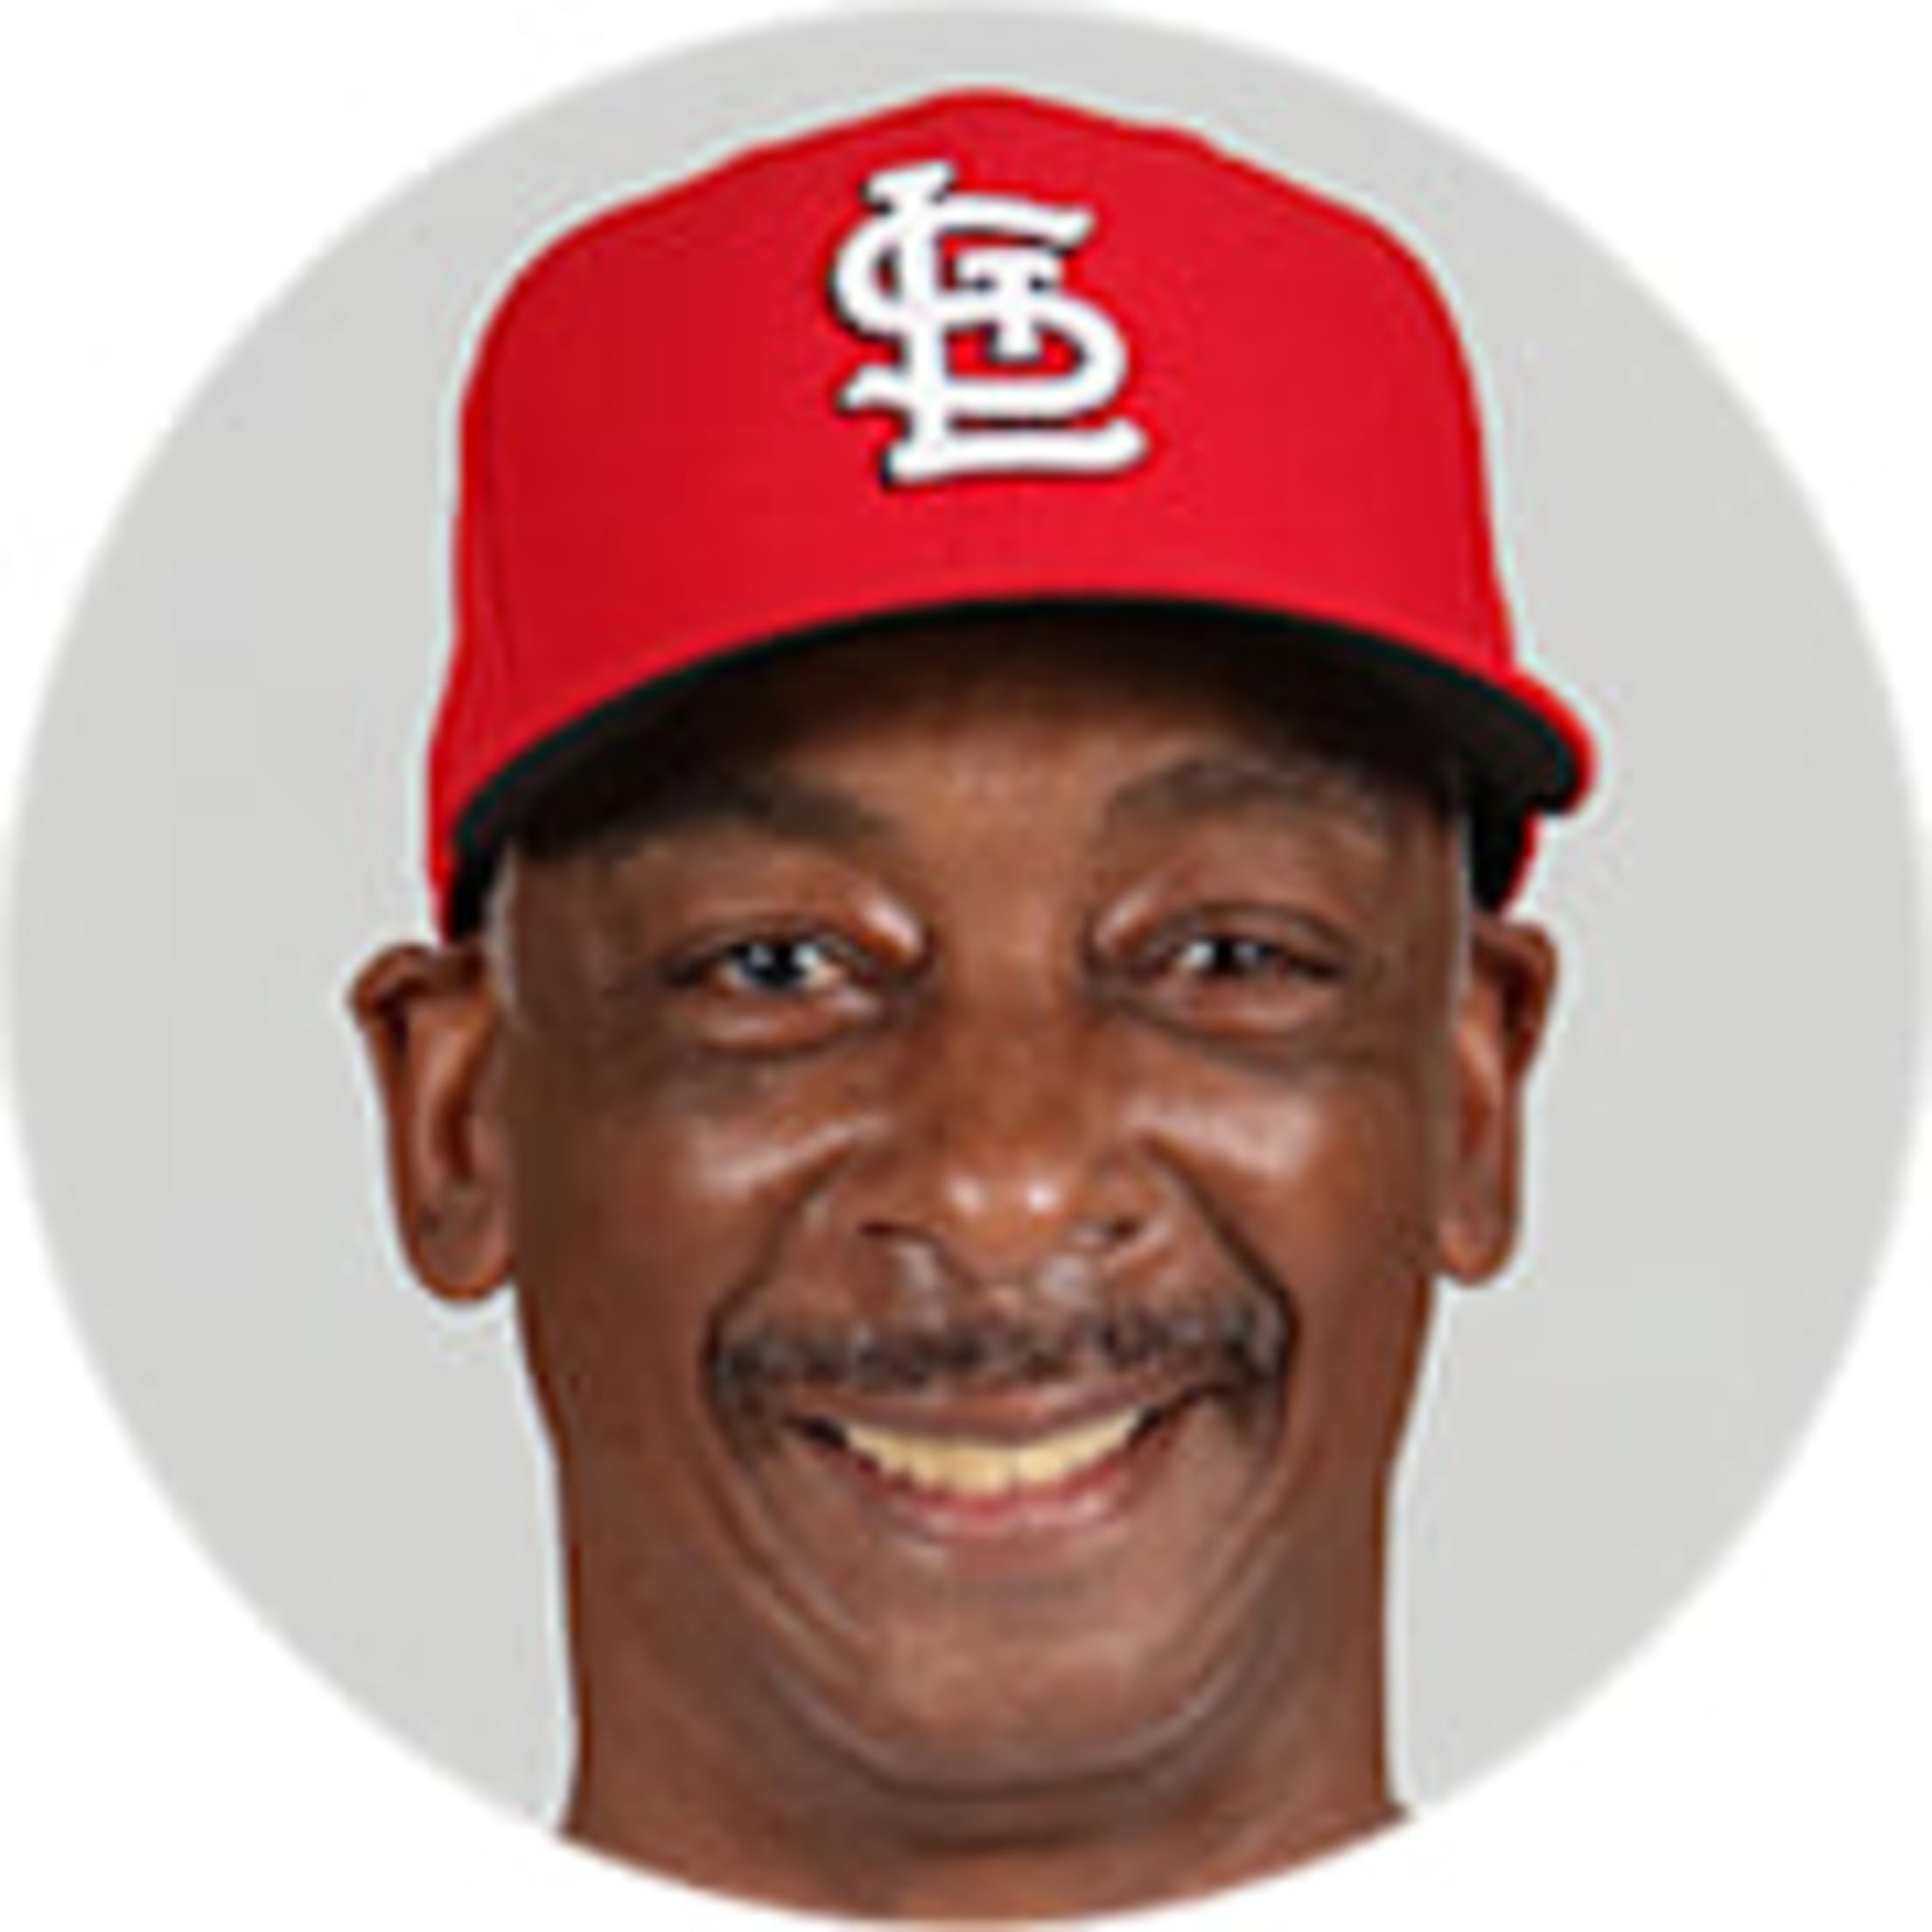 Willie McGee - Assistant Coach